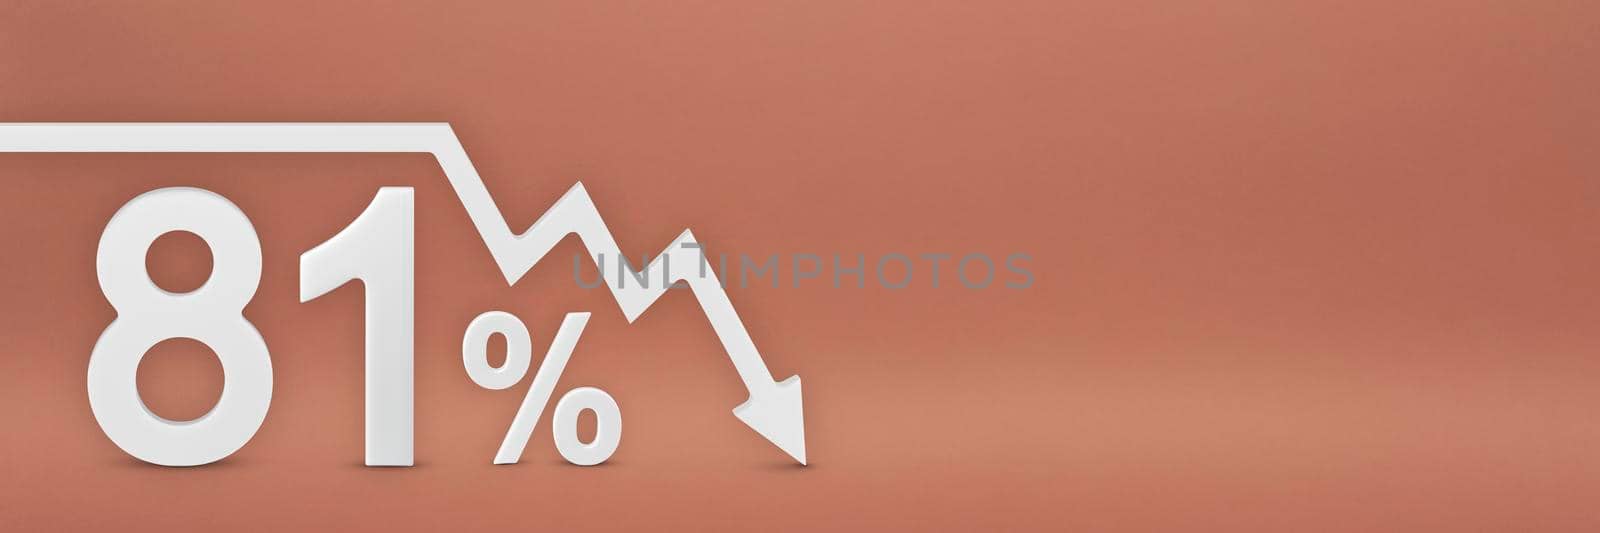 eighty-one percent, the arrow on the graph is pointing down. Stock market crash, bear market, inflation.Economic collapse, collapse of stocks.3d banner,81 percent discount sign on a red background. by SERSOL